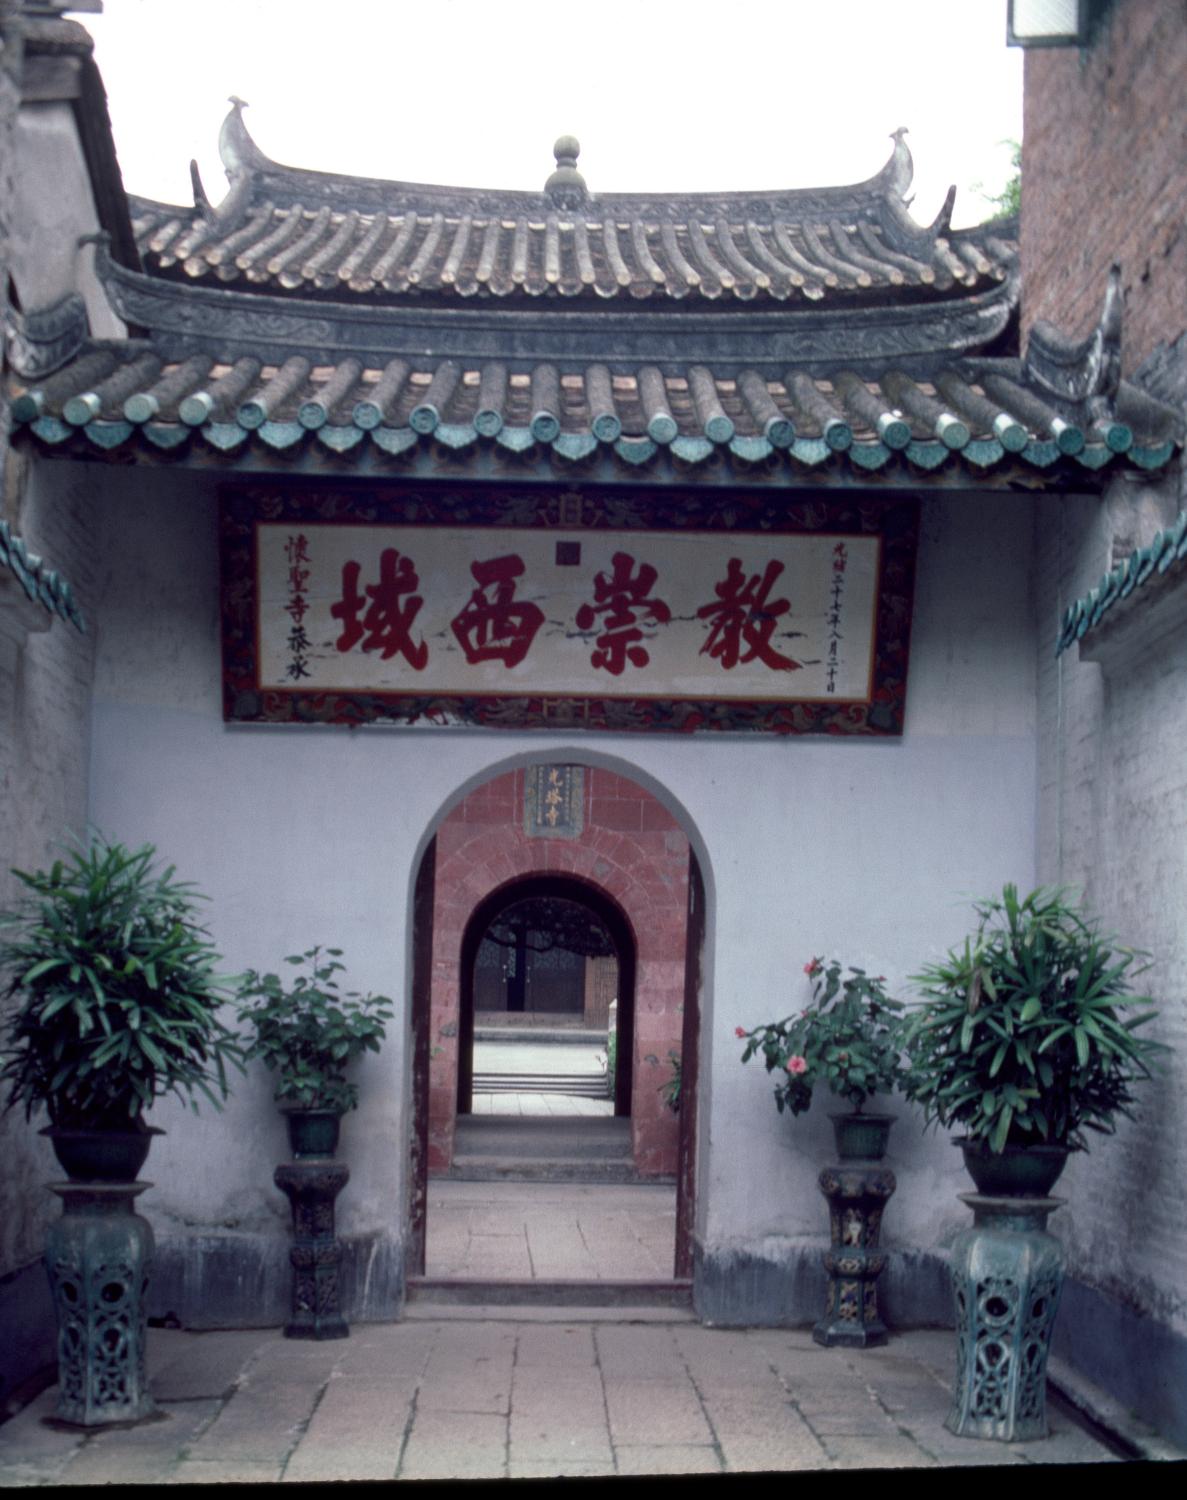 View of narrow courtyard at the southern entrance, looking towards the inner gate